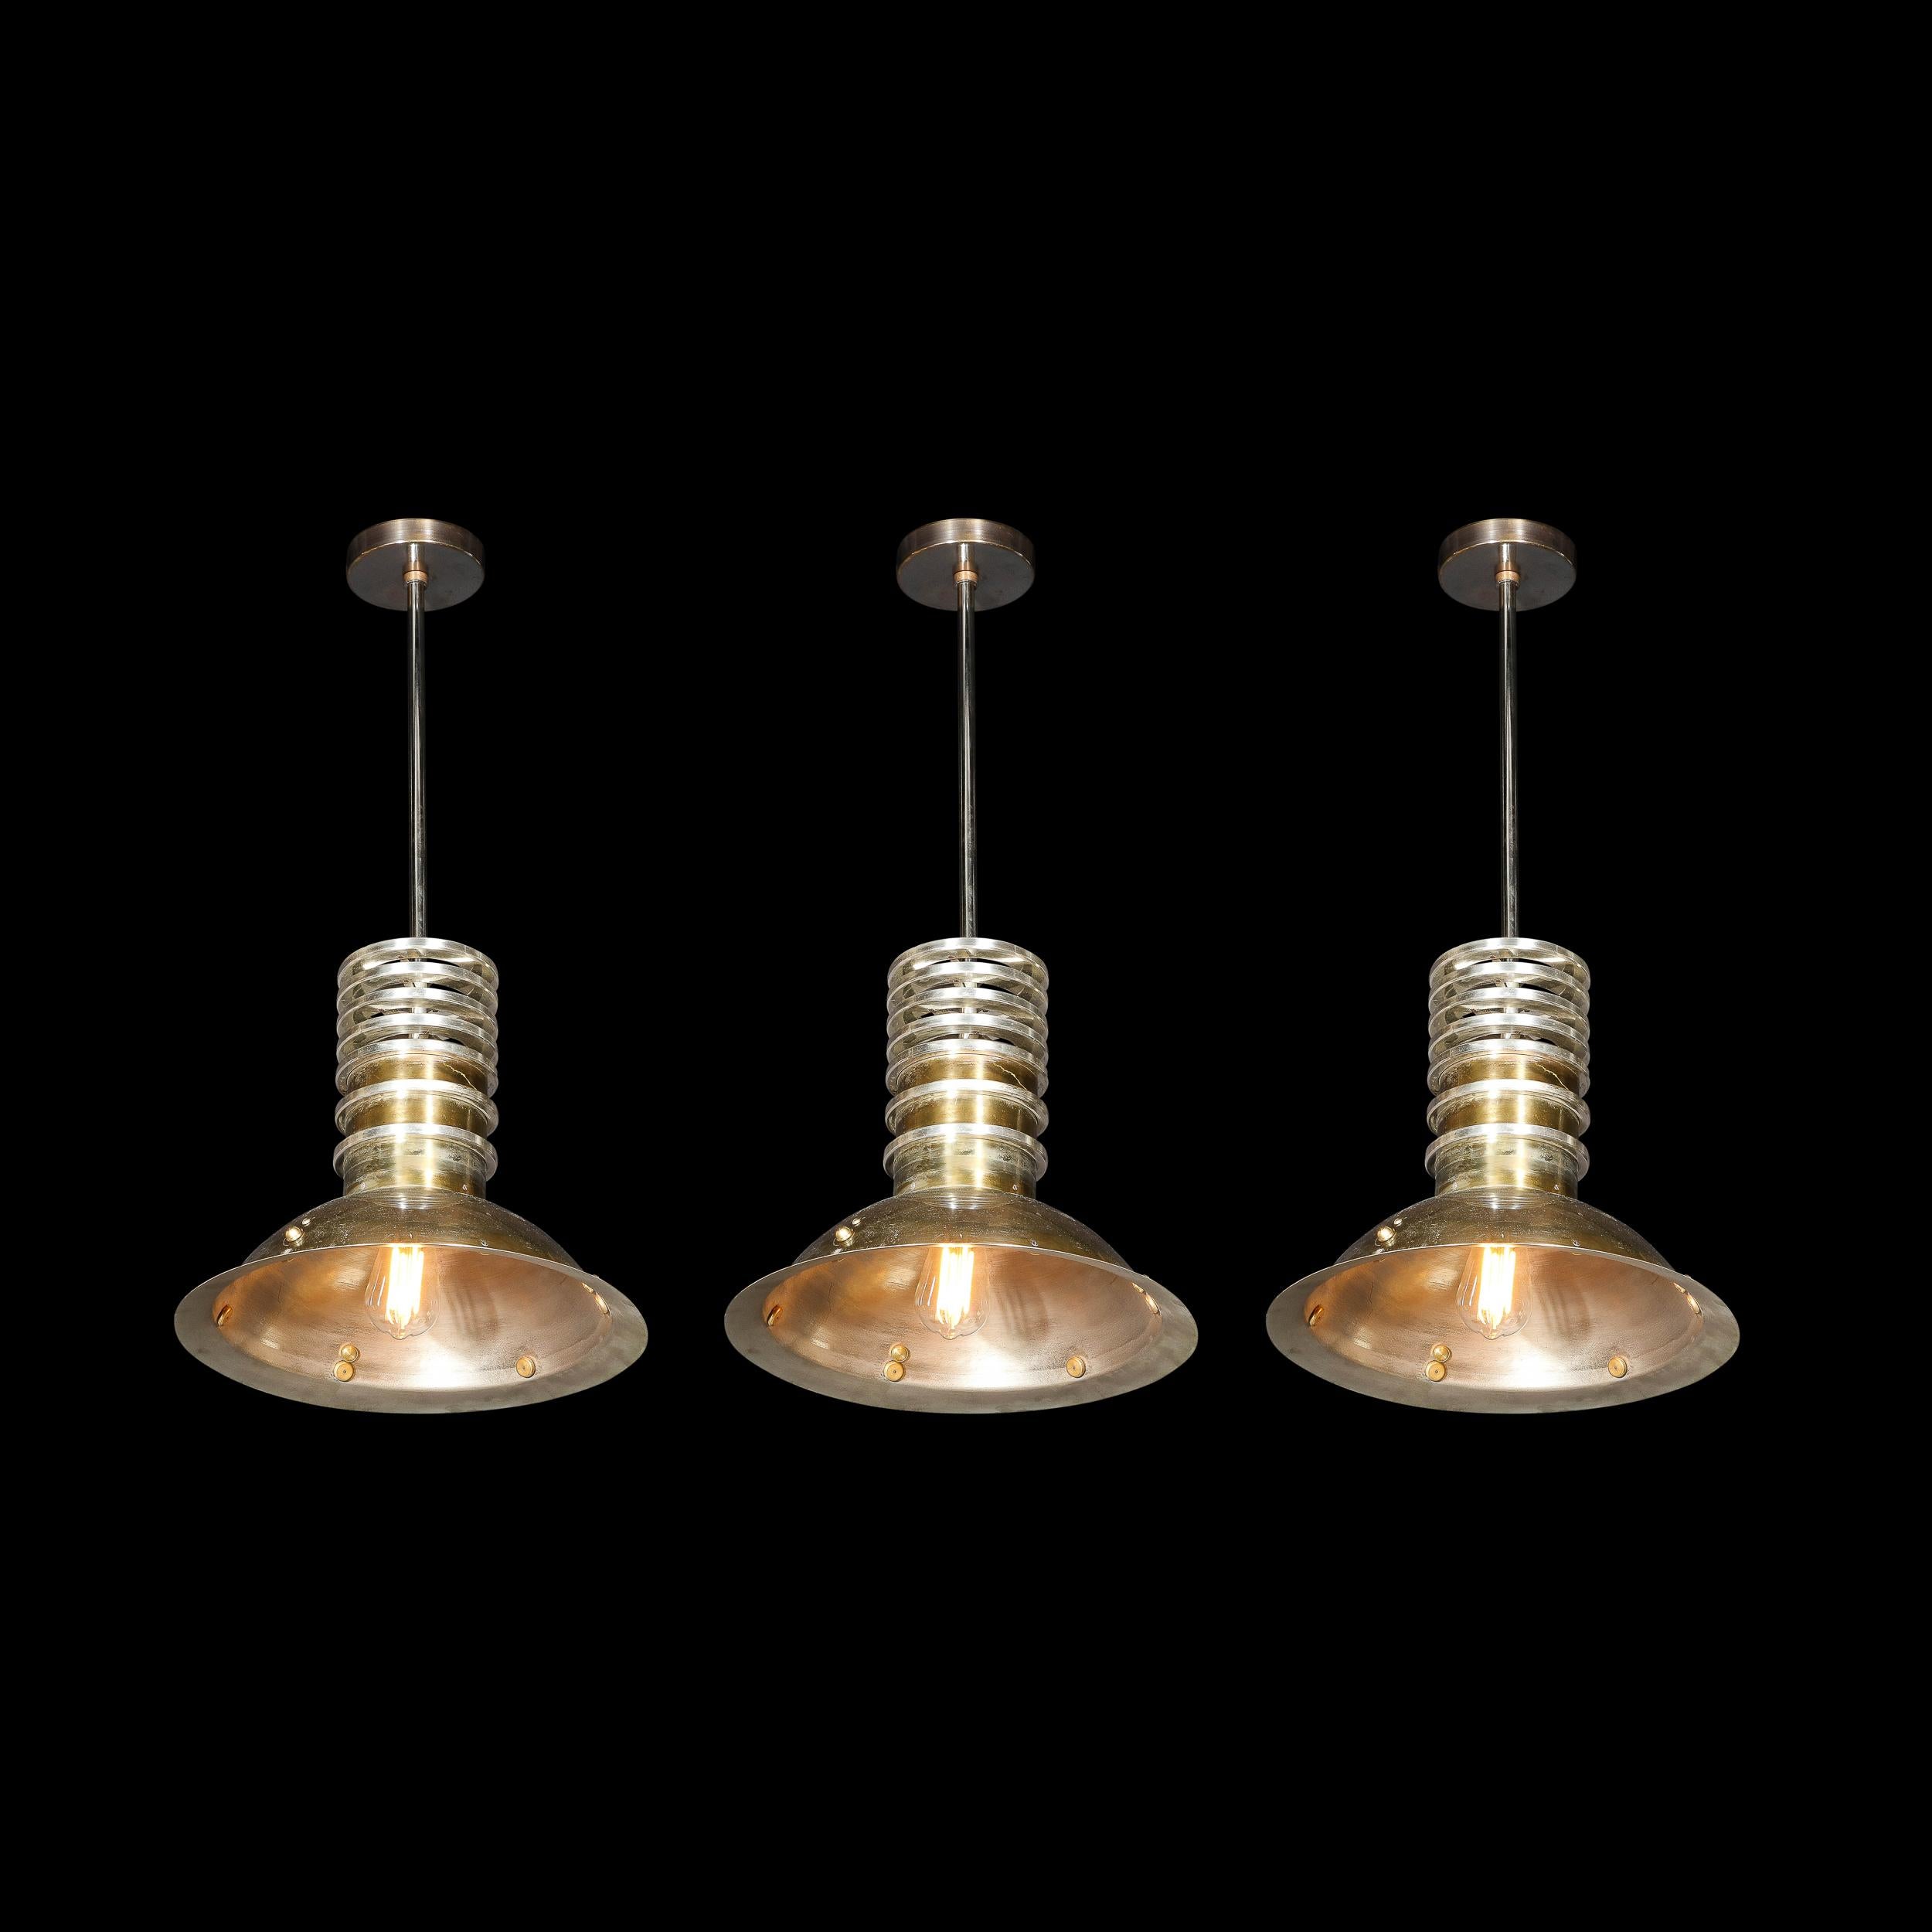 This very sophisticated set of three Art Deco industrial pendants were realized in France, cirac 1940. They feature domed concave bodies in antiqued bronze that affix to a cylindrical body in the same material circumscribed by three evenly spaced